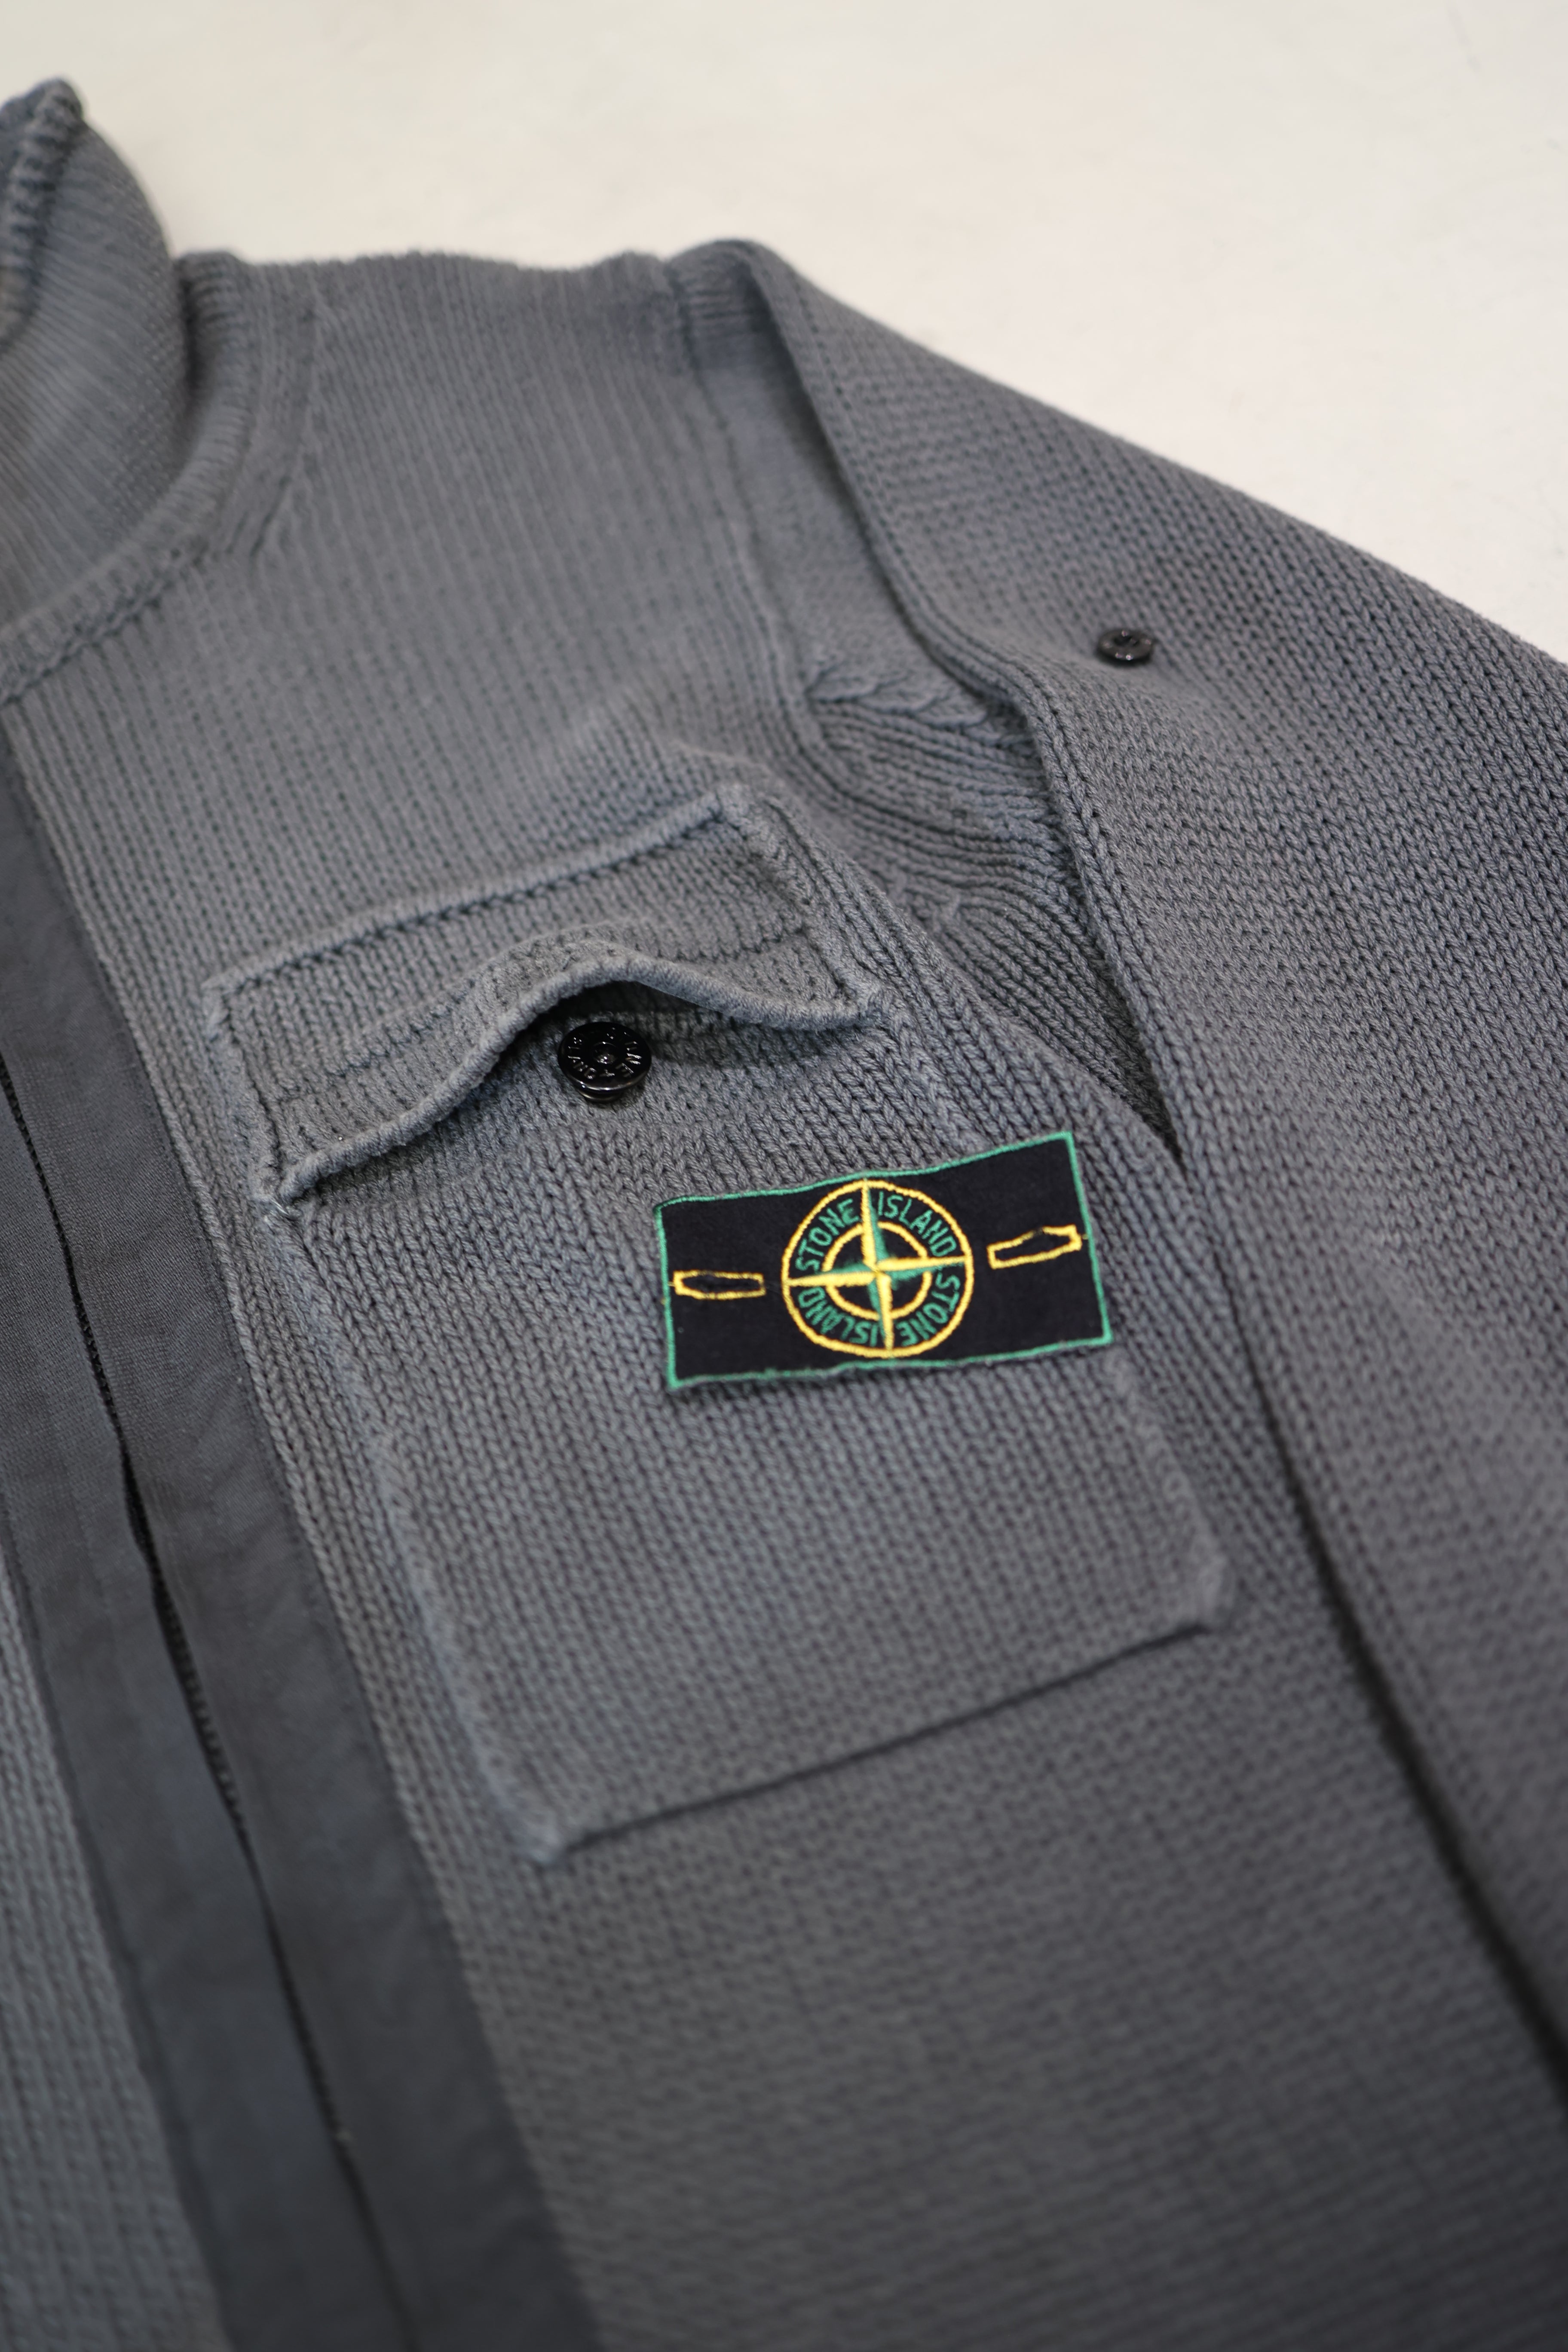 90's STONE ISLAND cotton drivers knit with big pocket